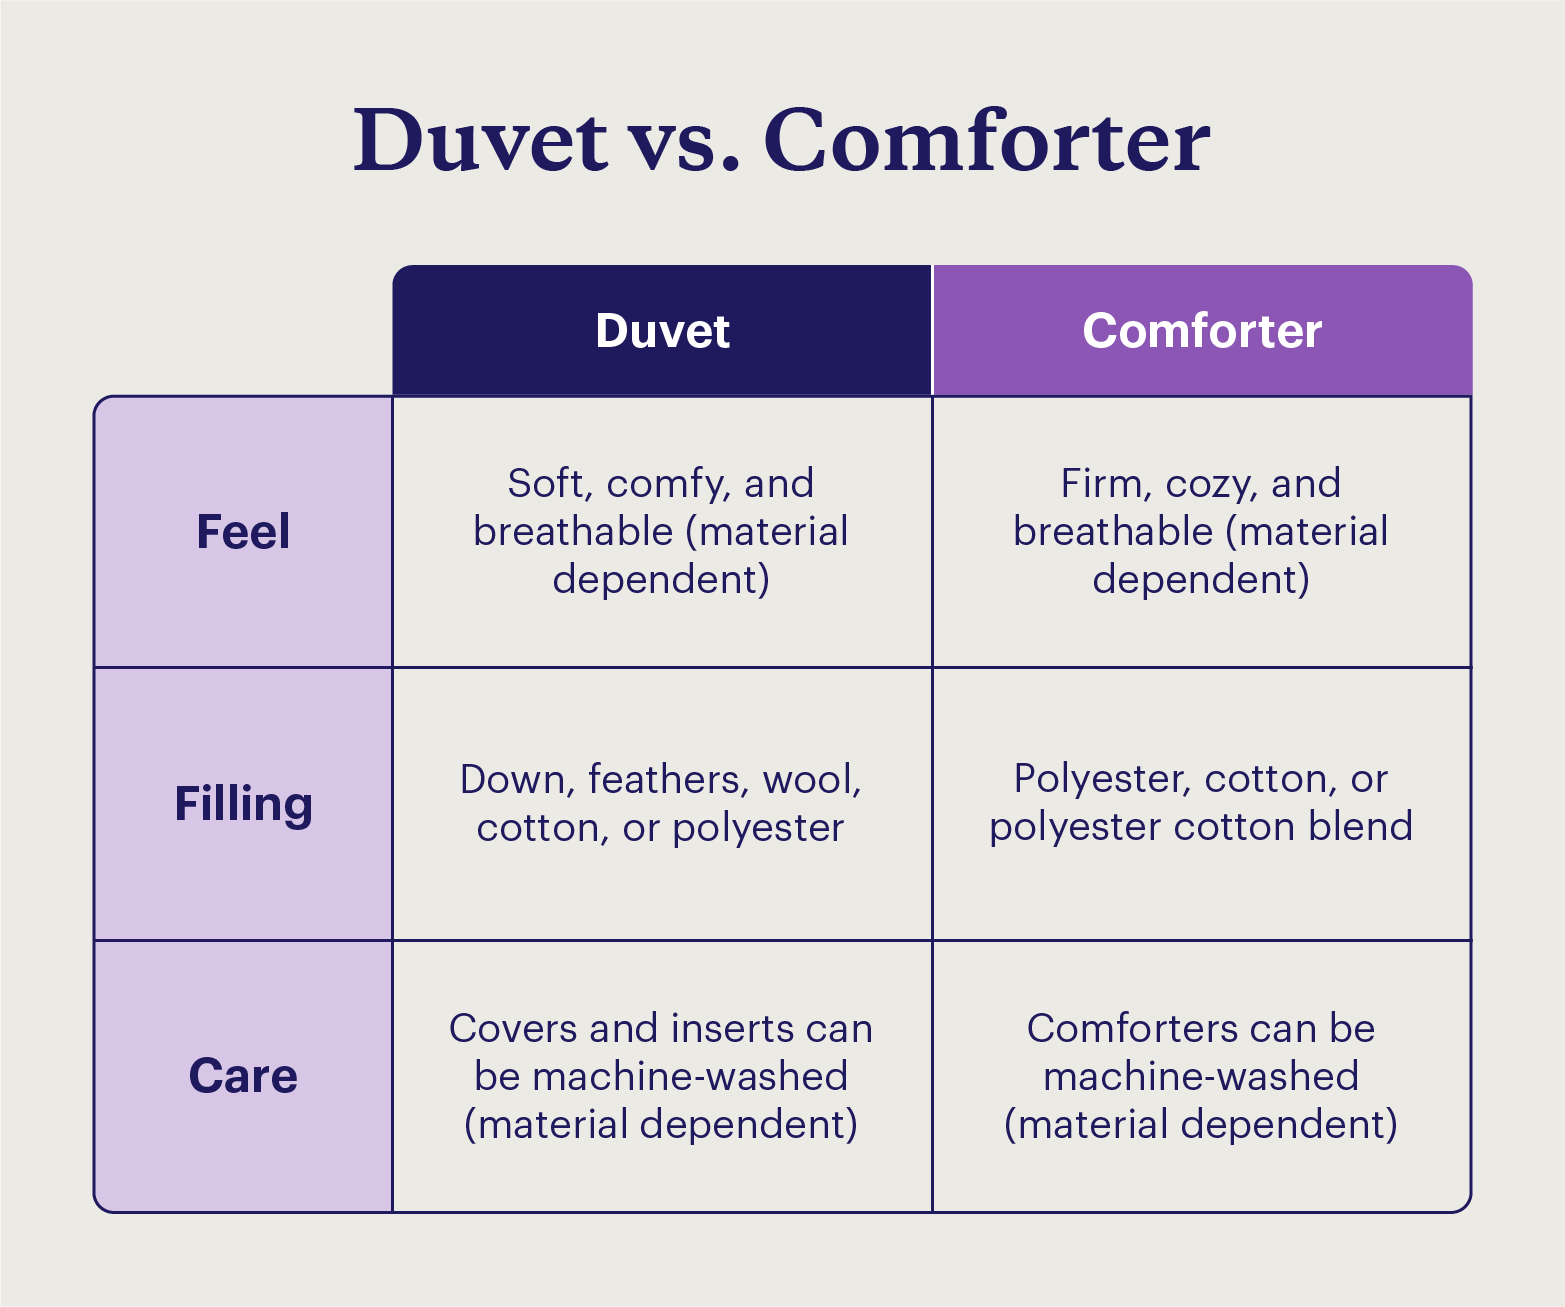 A comparison chart for duvets and comforters.